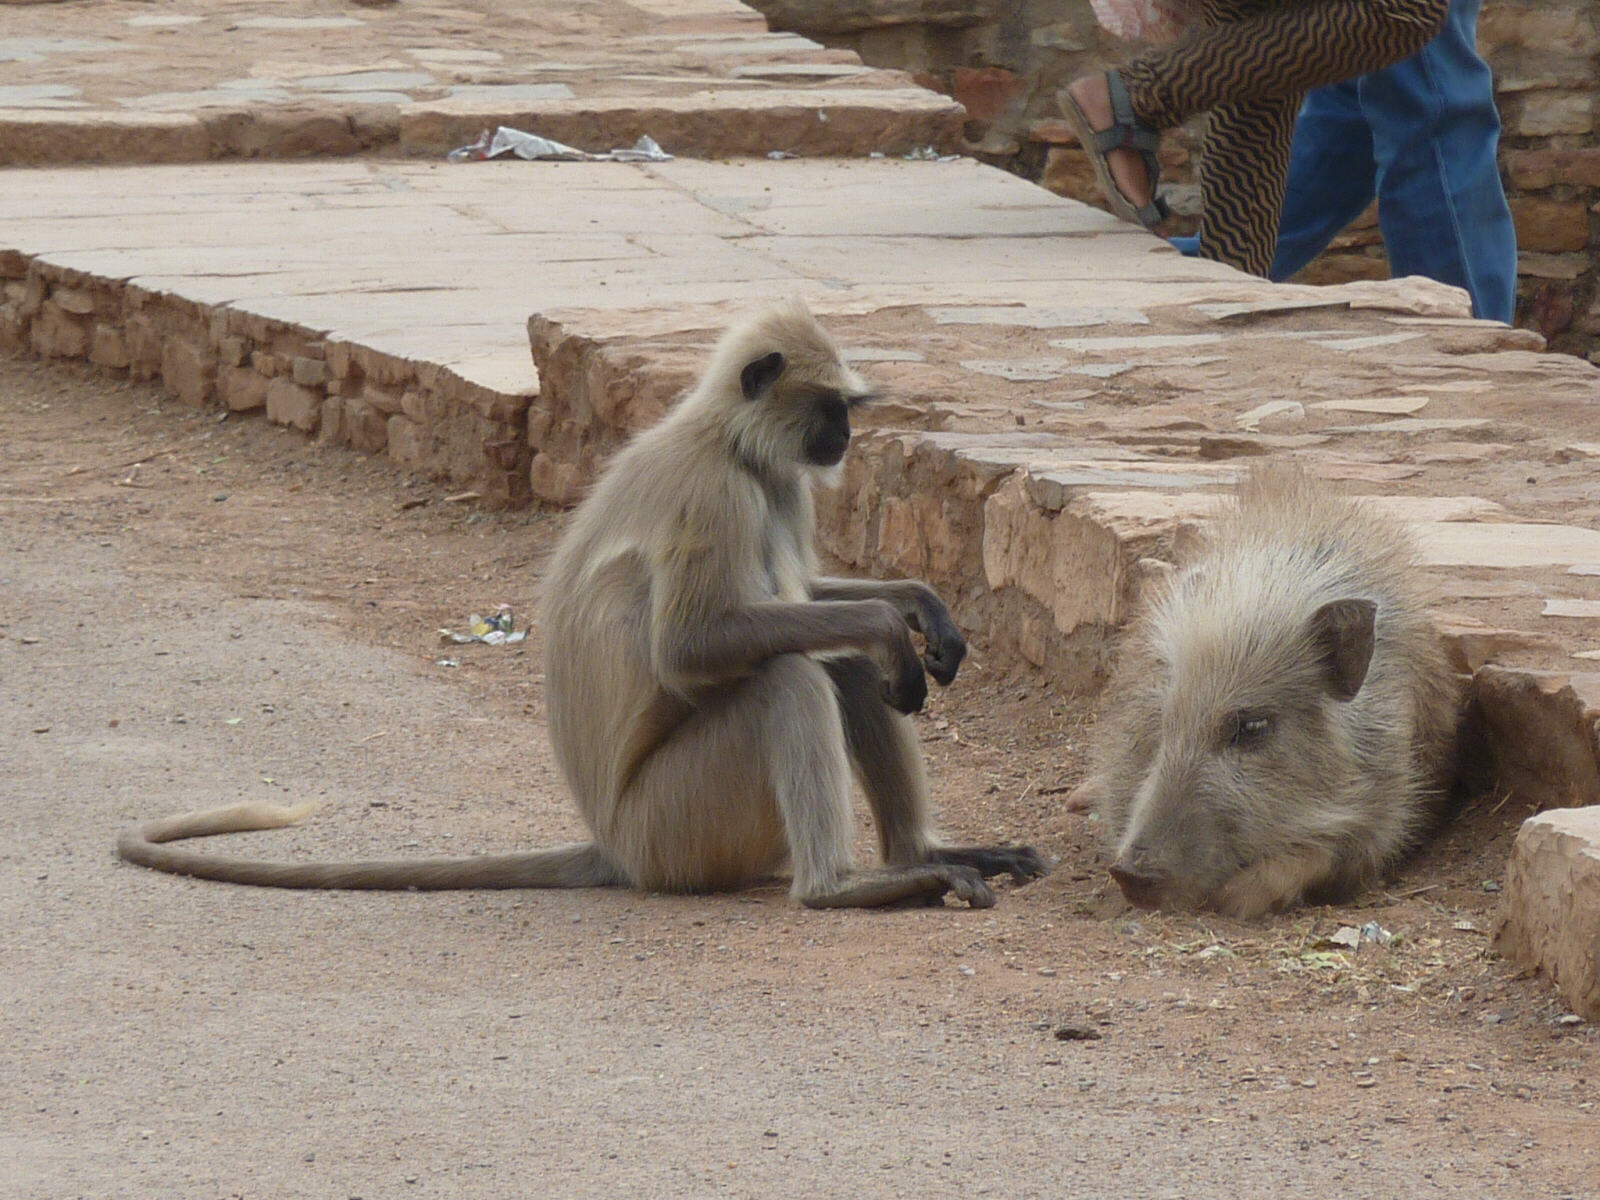 A monkey and a pig in the fort at Chittorgarh, India